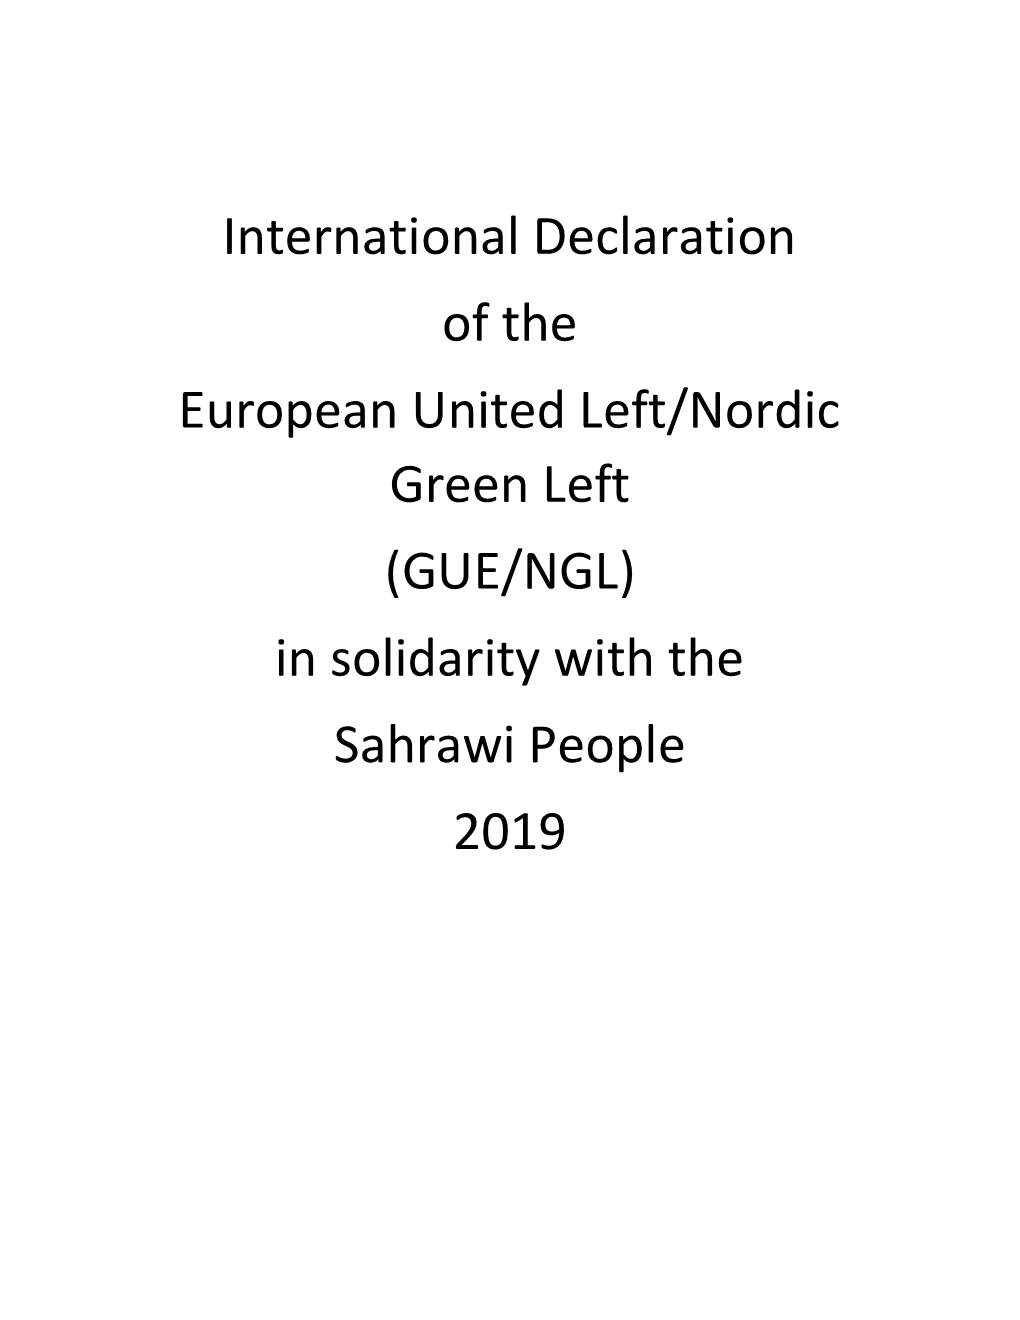 (GUE/NGL) in Solidarity with the Sahrawi People 2019